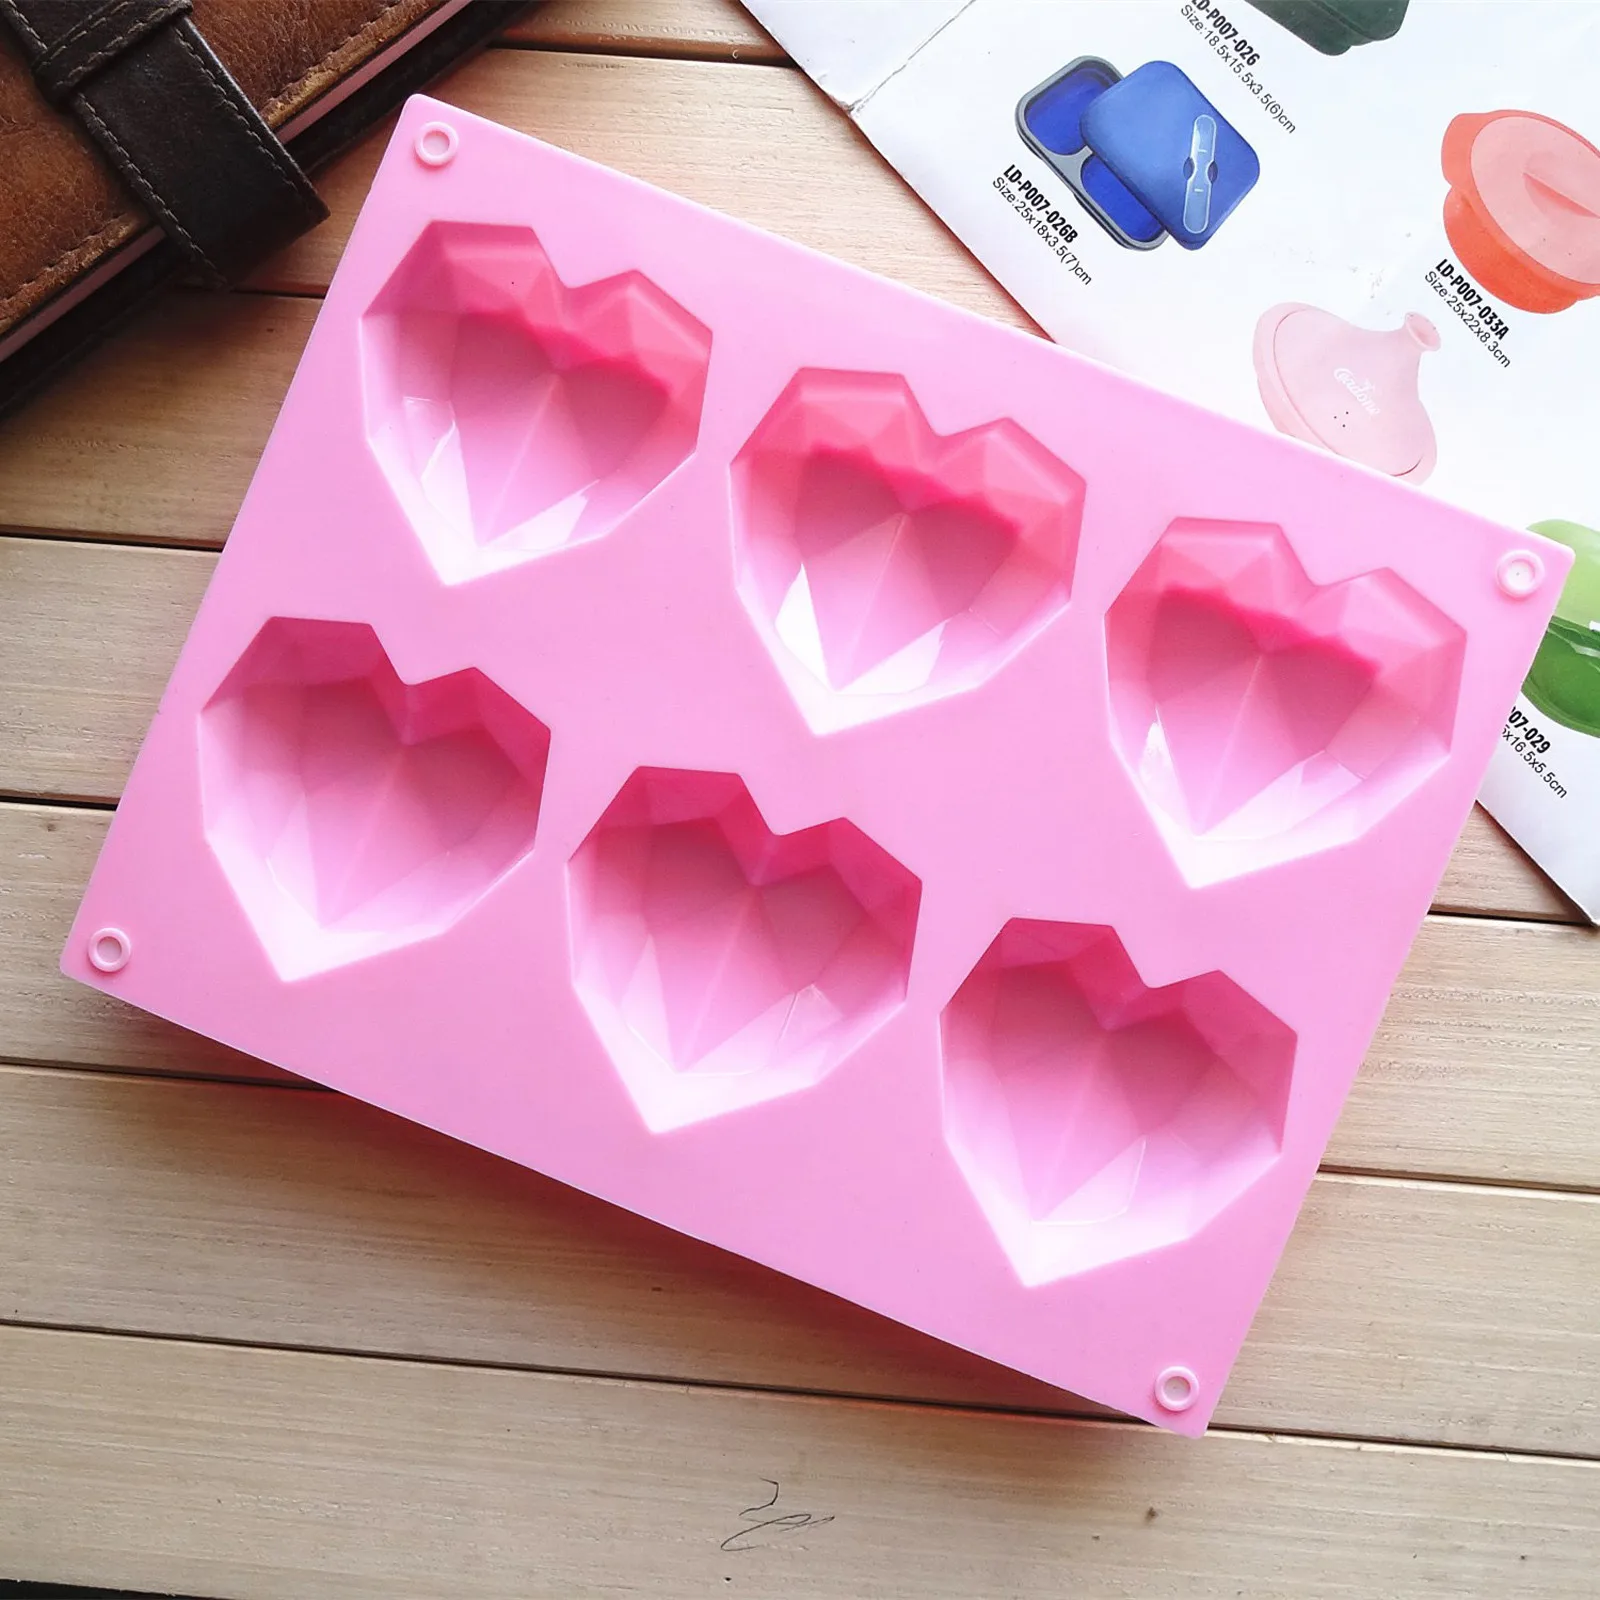 Heart-shaped Sphere Silicone Cake Mold Muffin Chocolate Cookie Baking Mould Pan Chocolate Candy Pastry Sphere Baking Cake tool